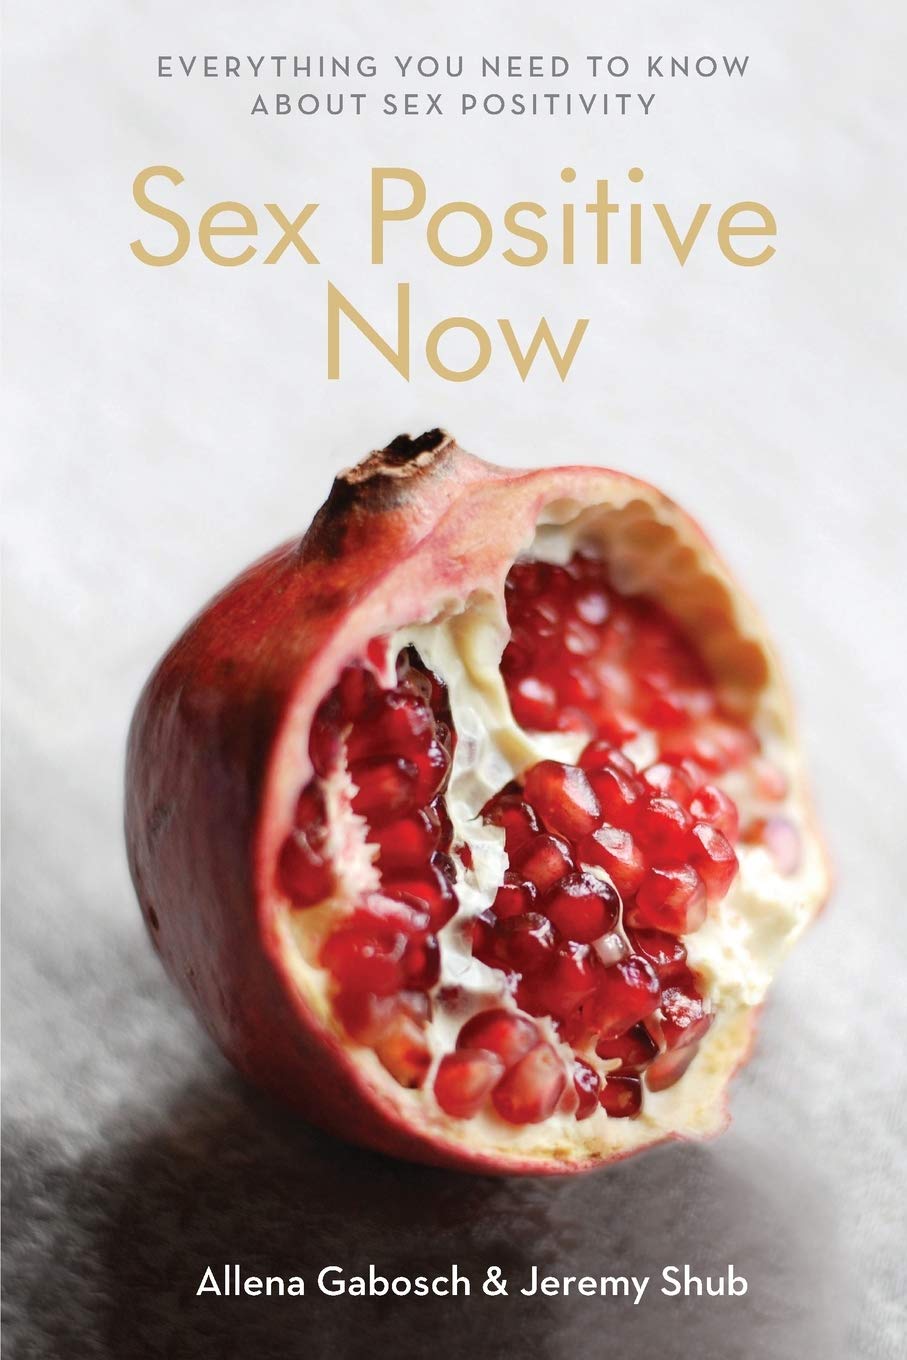 Sex Positive Now: Everything You Need to Know About Sex Positivity Edited by Allena Gabosch and Jeremy Shub